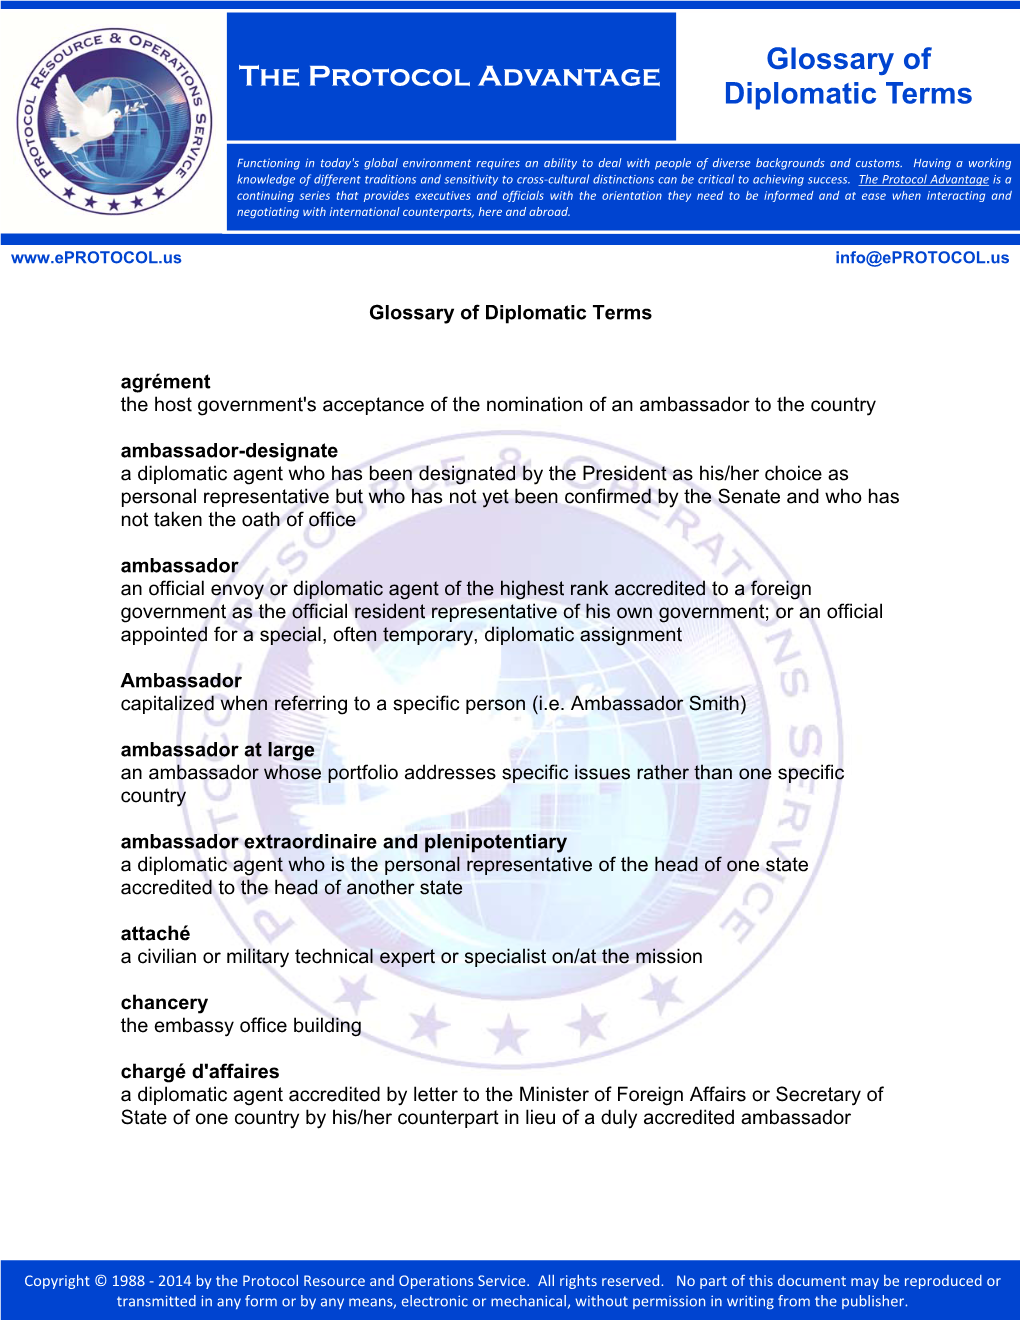 The Protocol Advantage Glossary of Diplomatic Terms